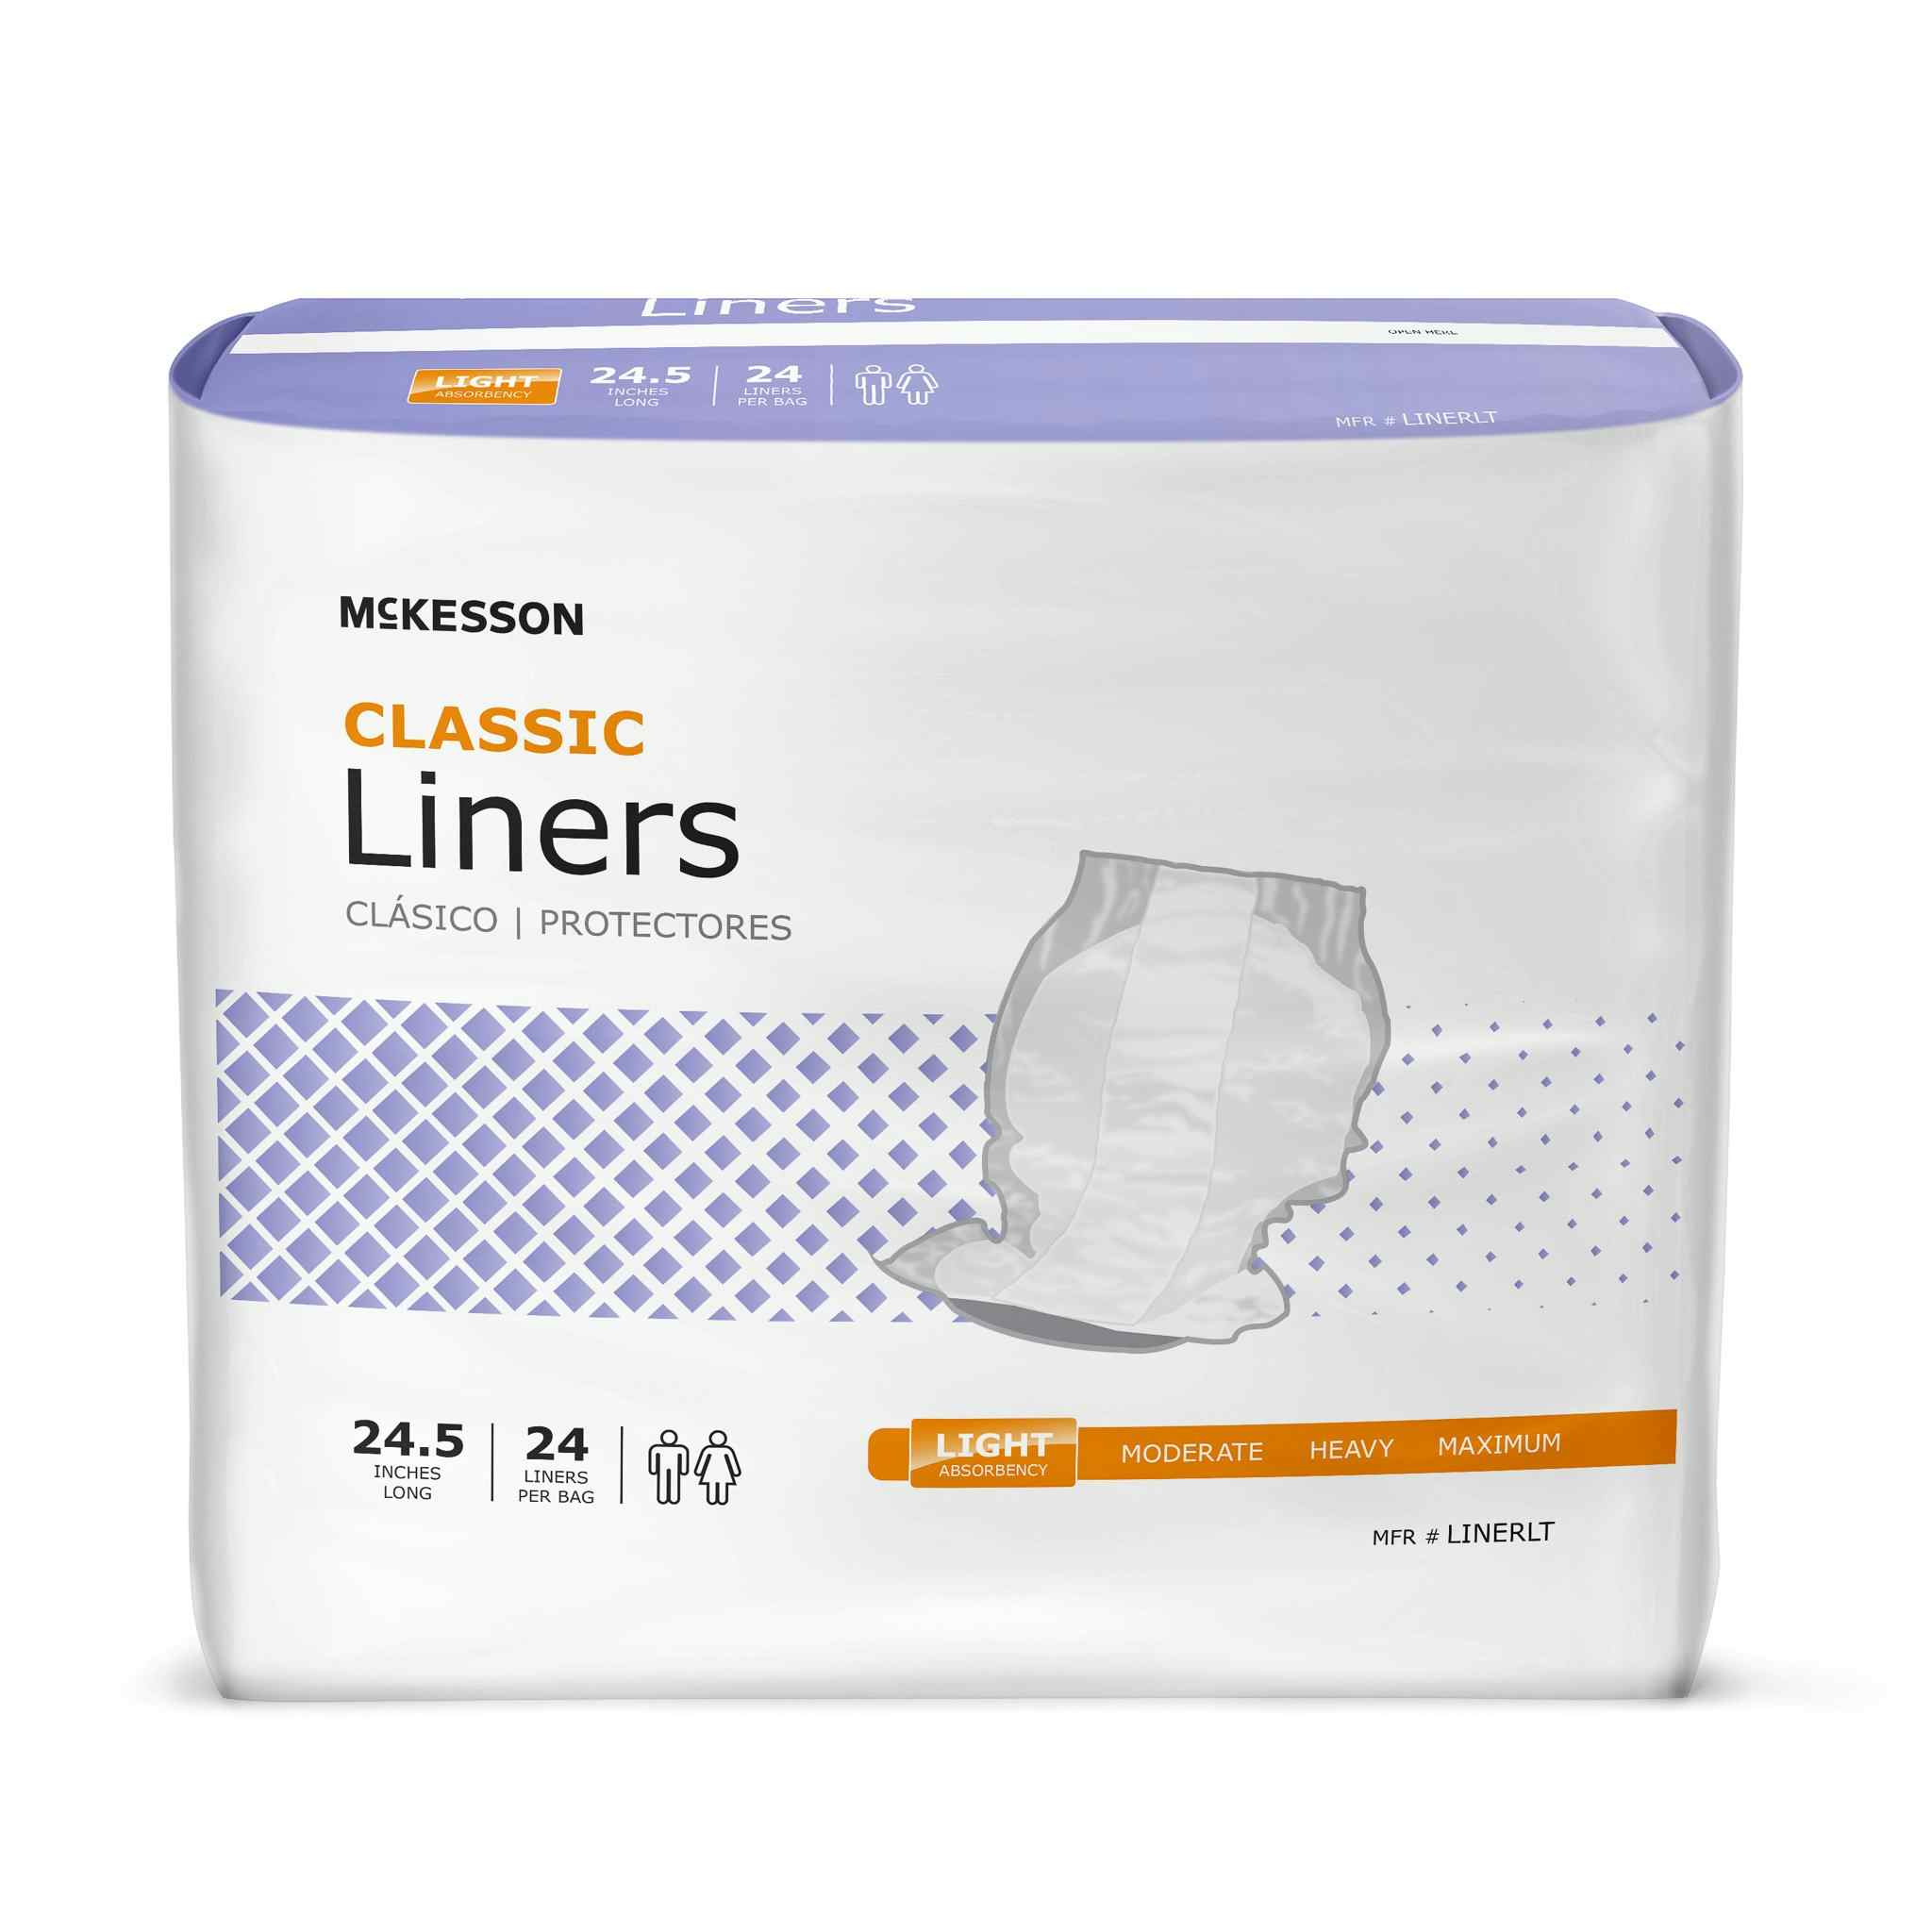 McKesson Classic Disposable Incontinence Liner, Light Absorbency, LINERLT, One Size Fits Most - Case of 96